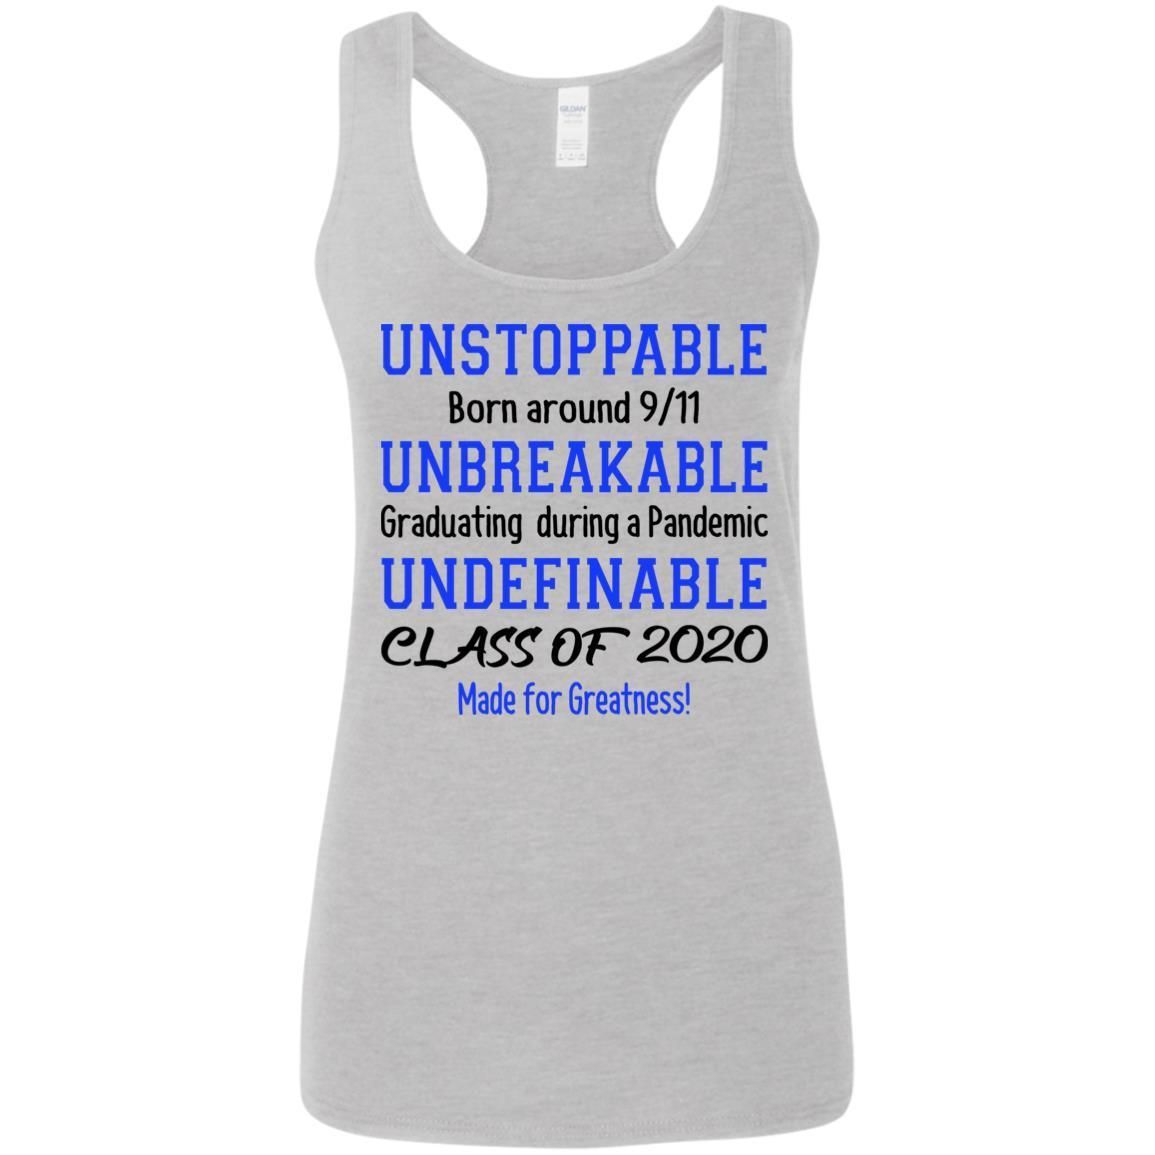 Unstoppable Born Around 9-11 Unbreakable Graduating Class of 2020 shirts